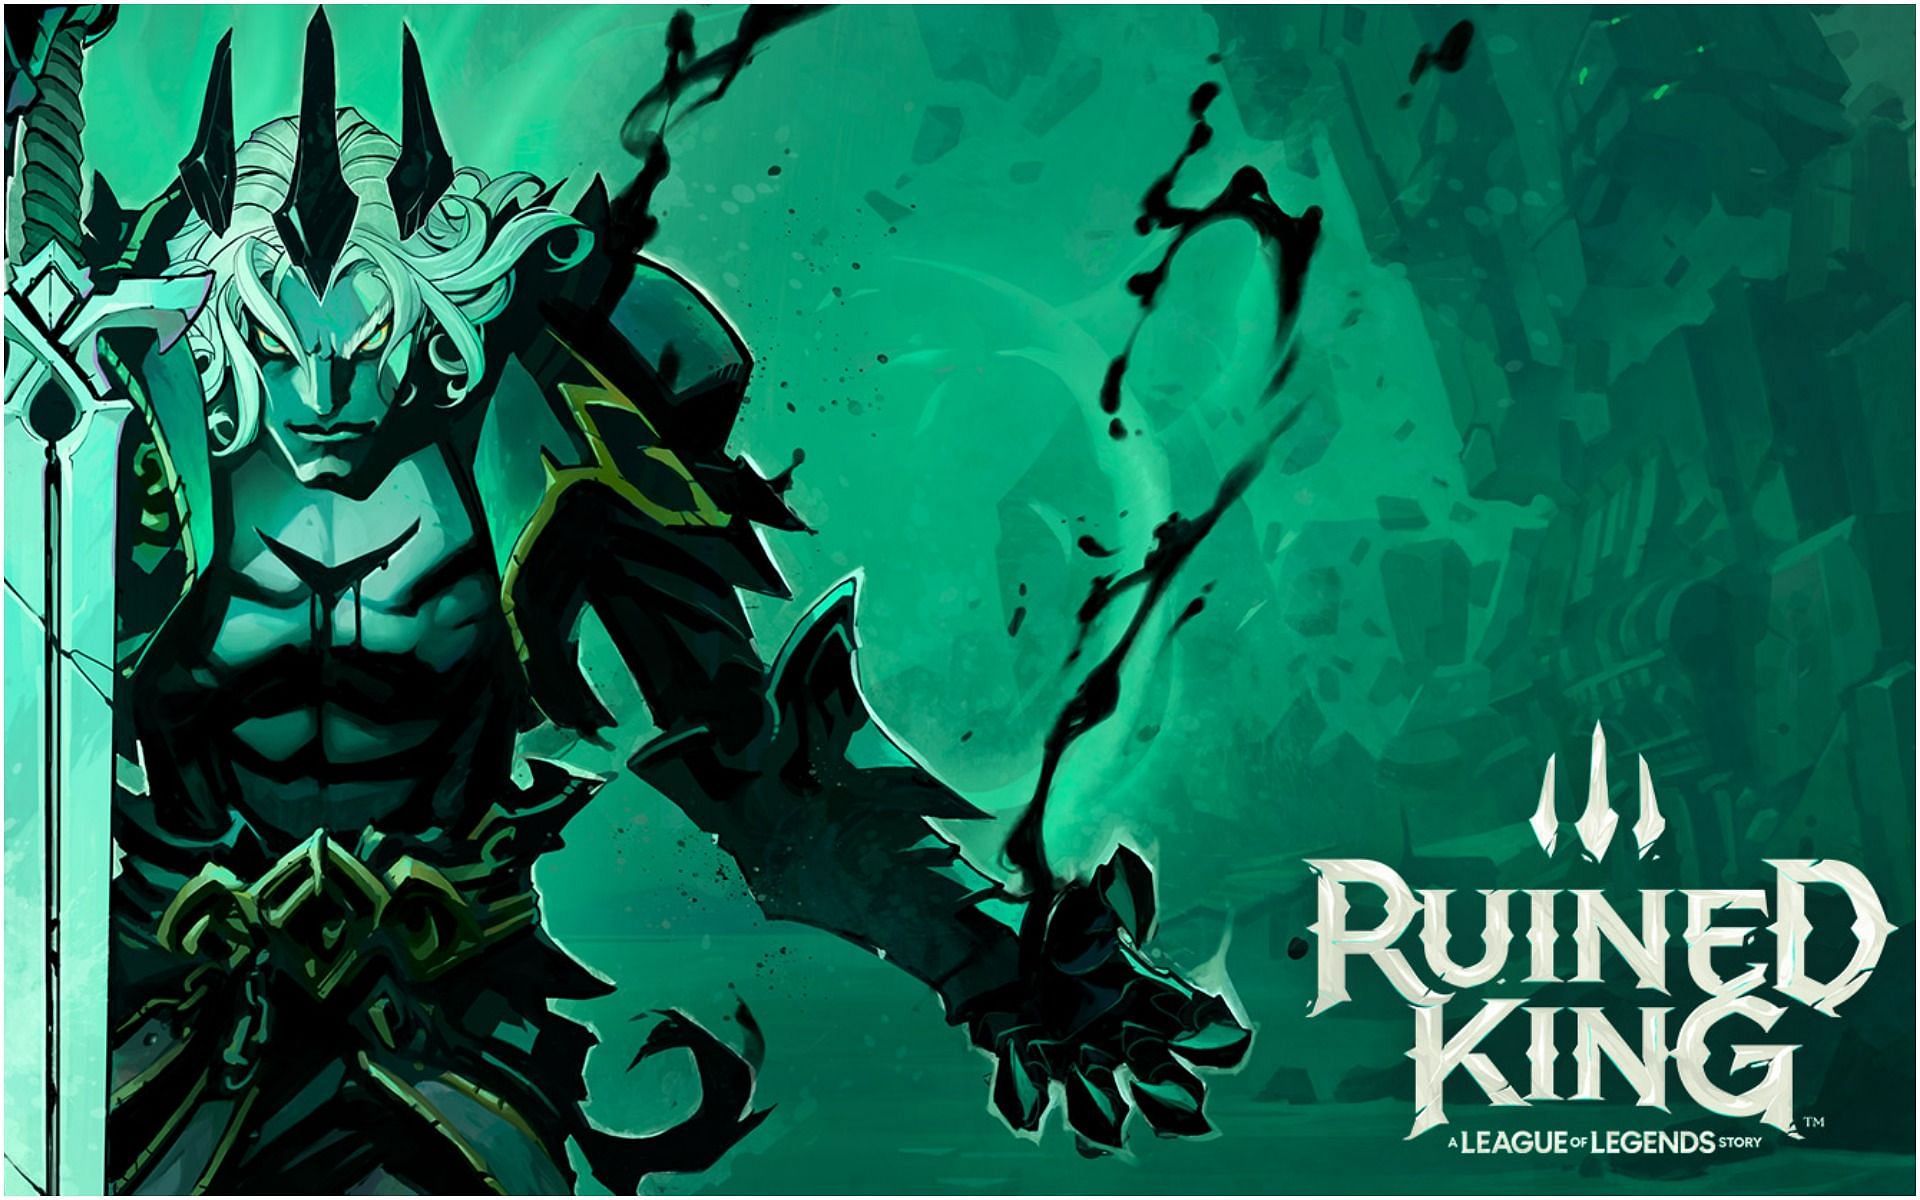 Players can now buy Ruined King on both PC as well as consoles (Image via League of Legends)